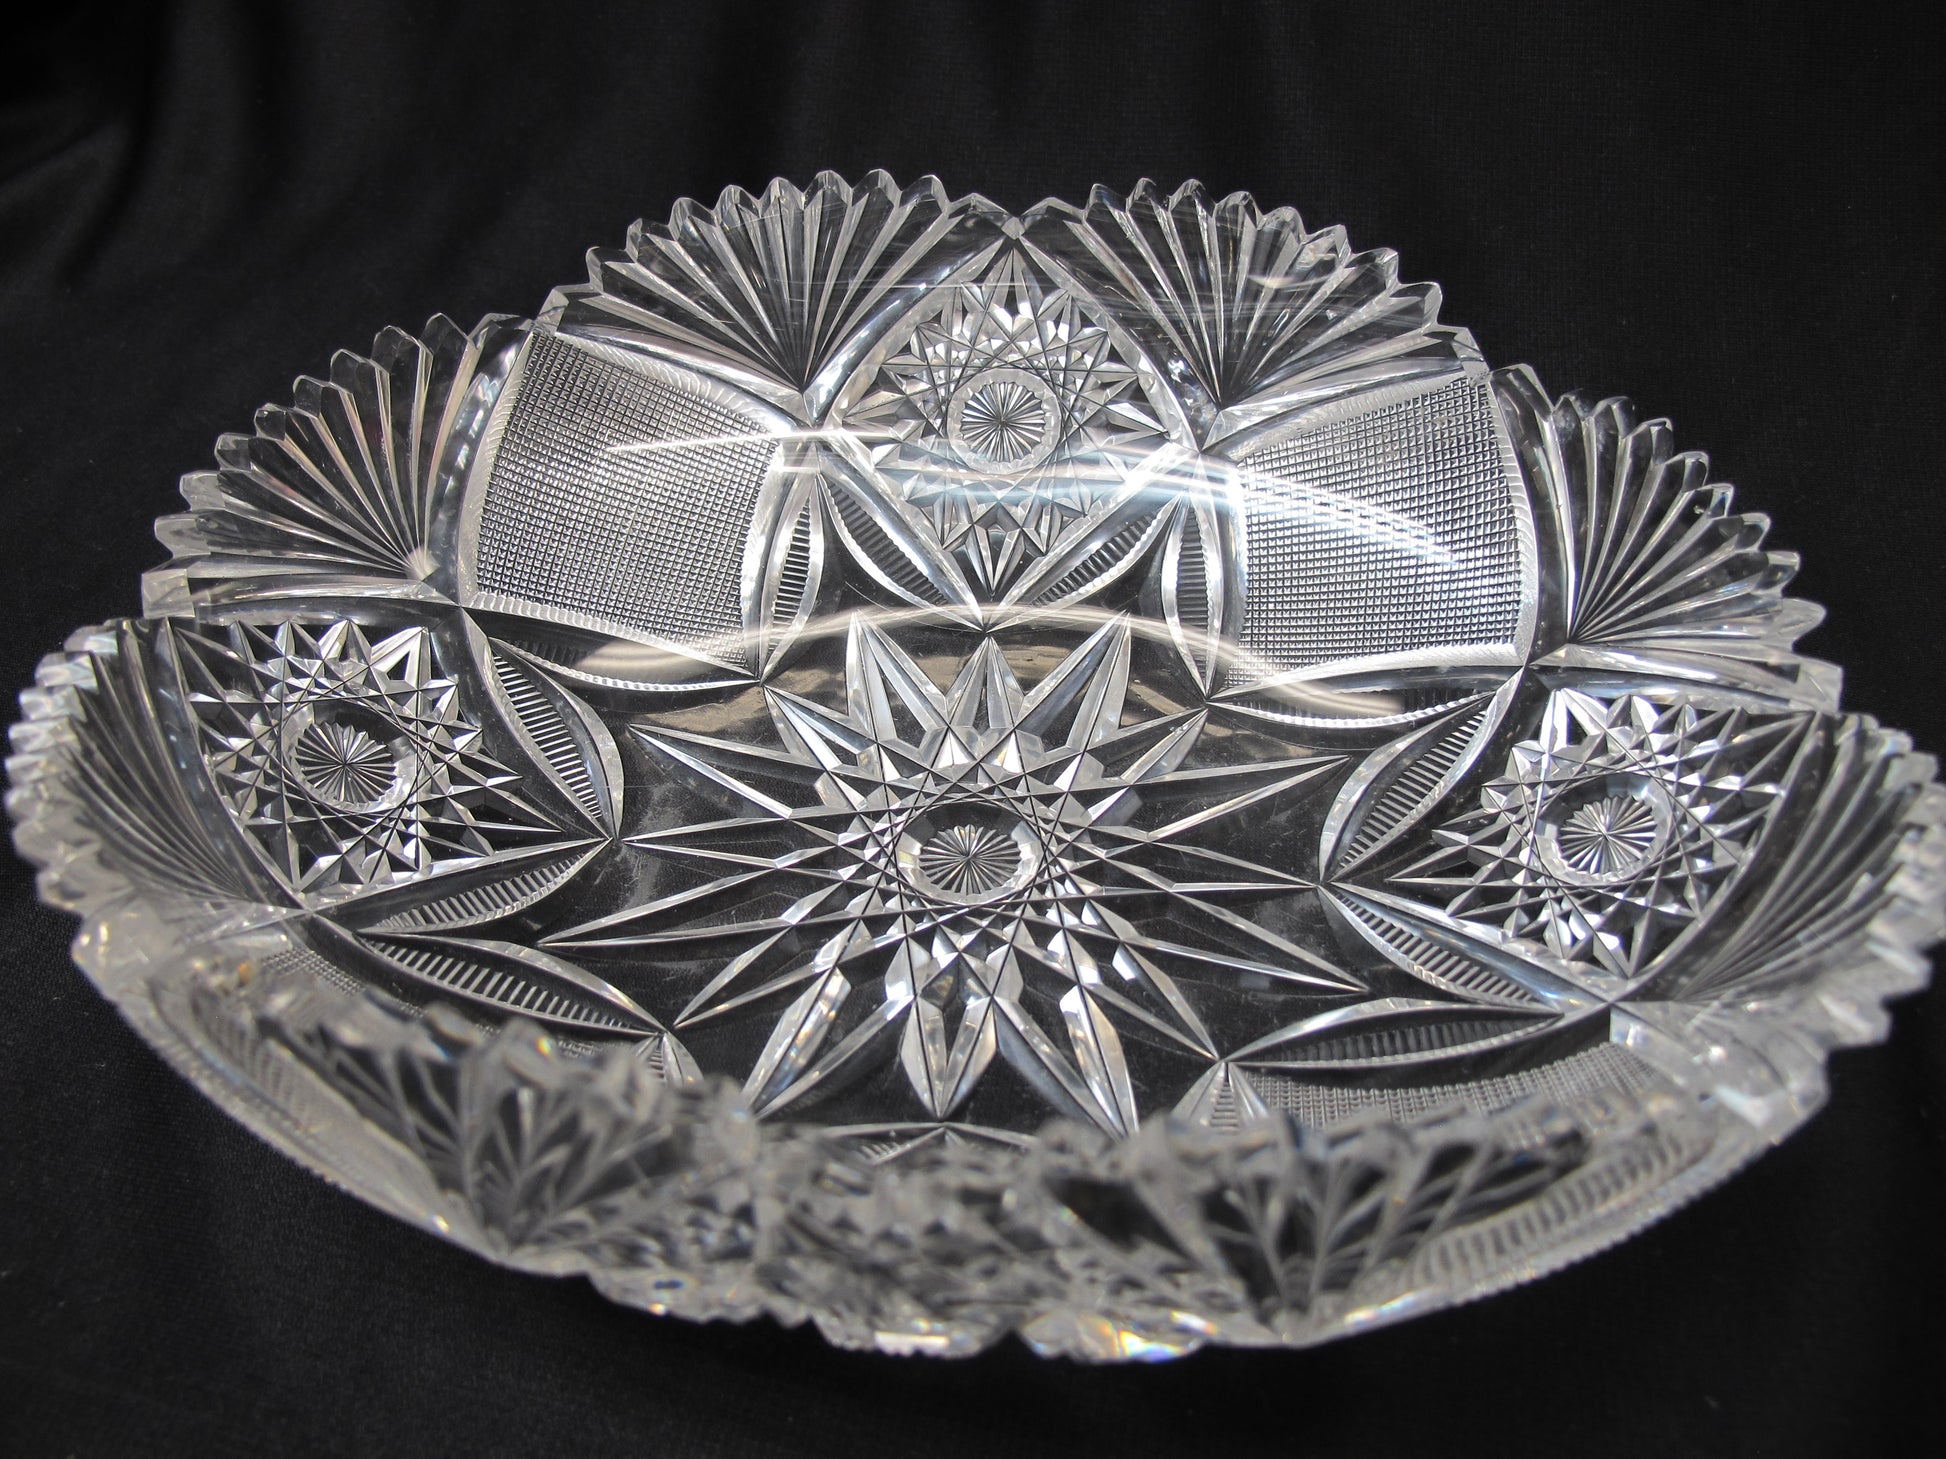 L. Straus Imperial American Brilliant Period hand Cut Glass oval bowl abp - O'Rourke crystal awards & gifts abp cut glass